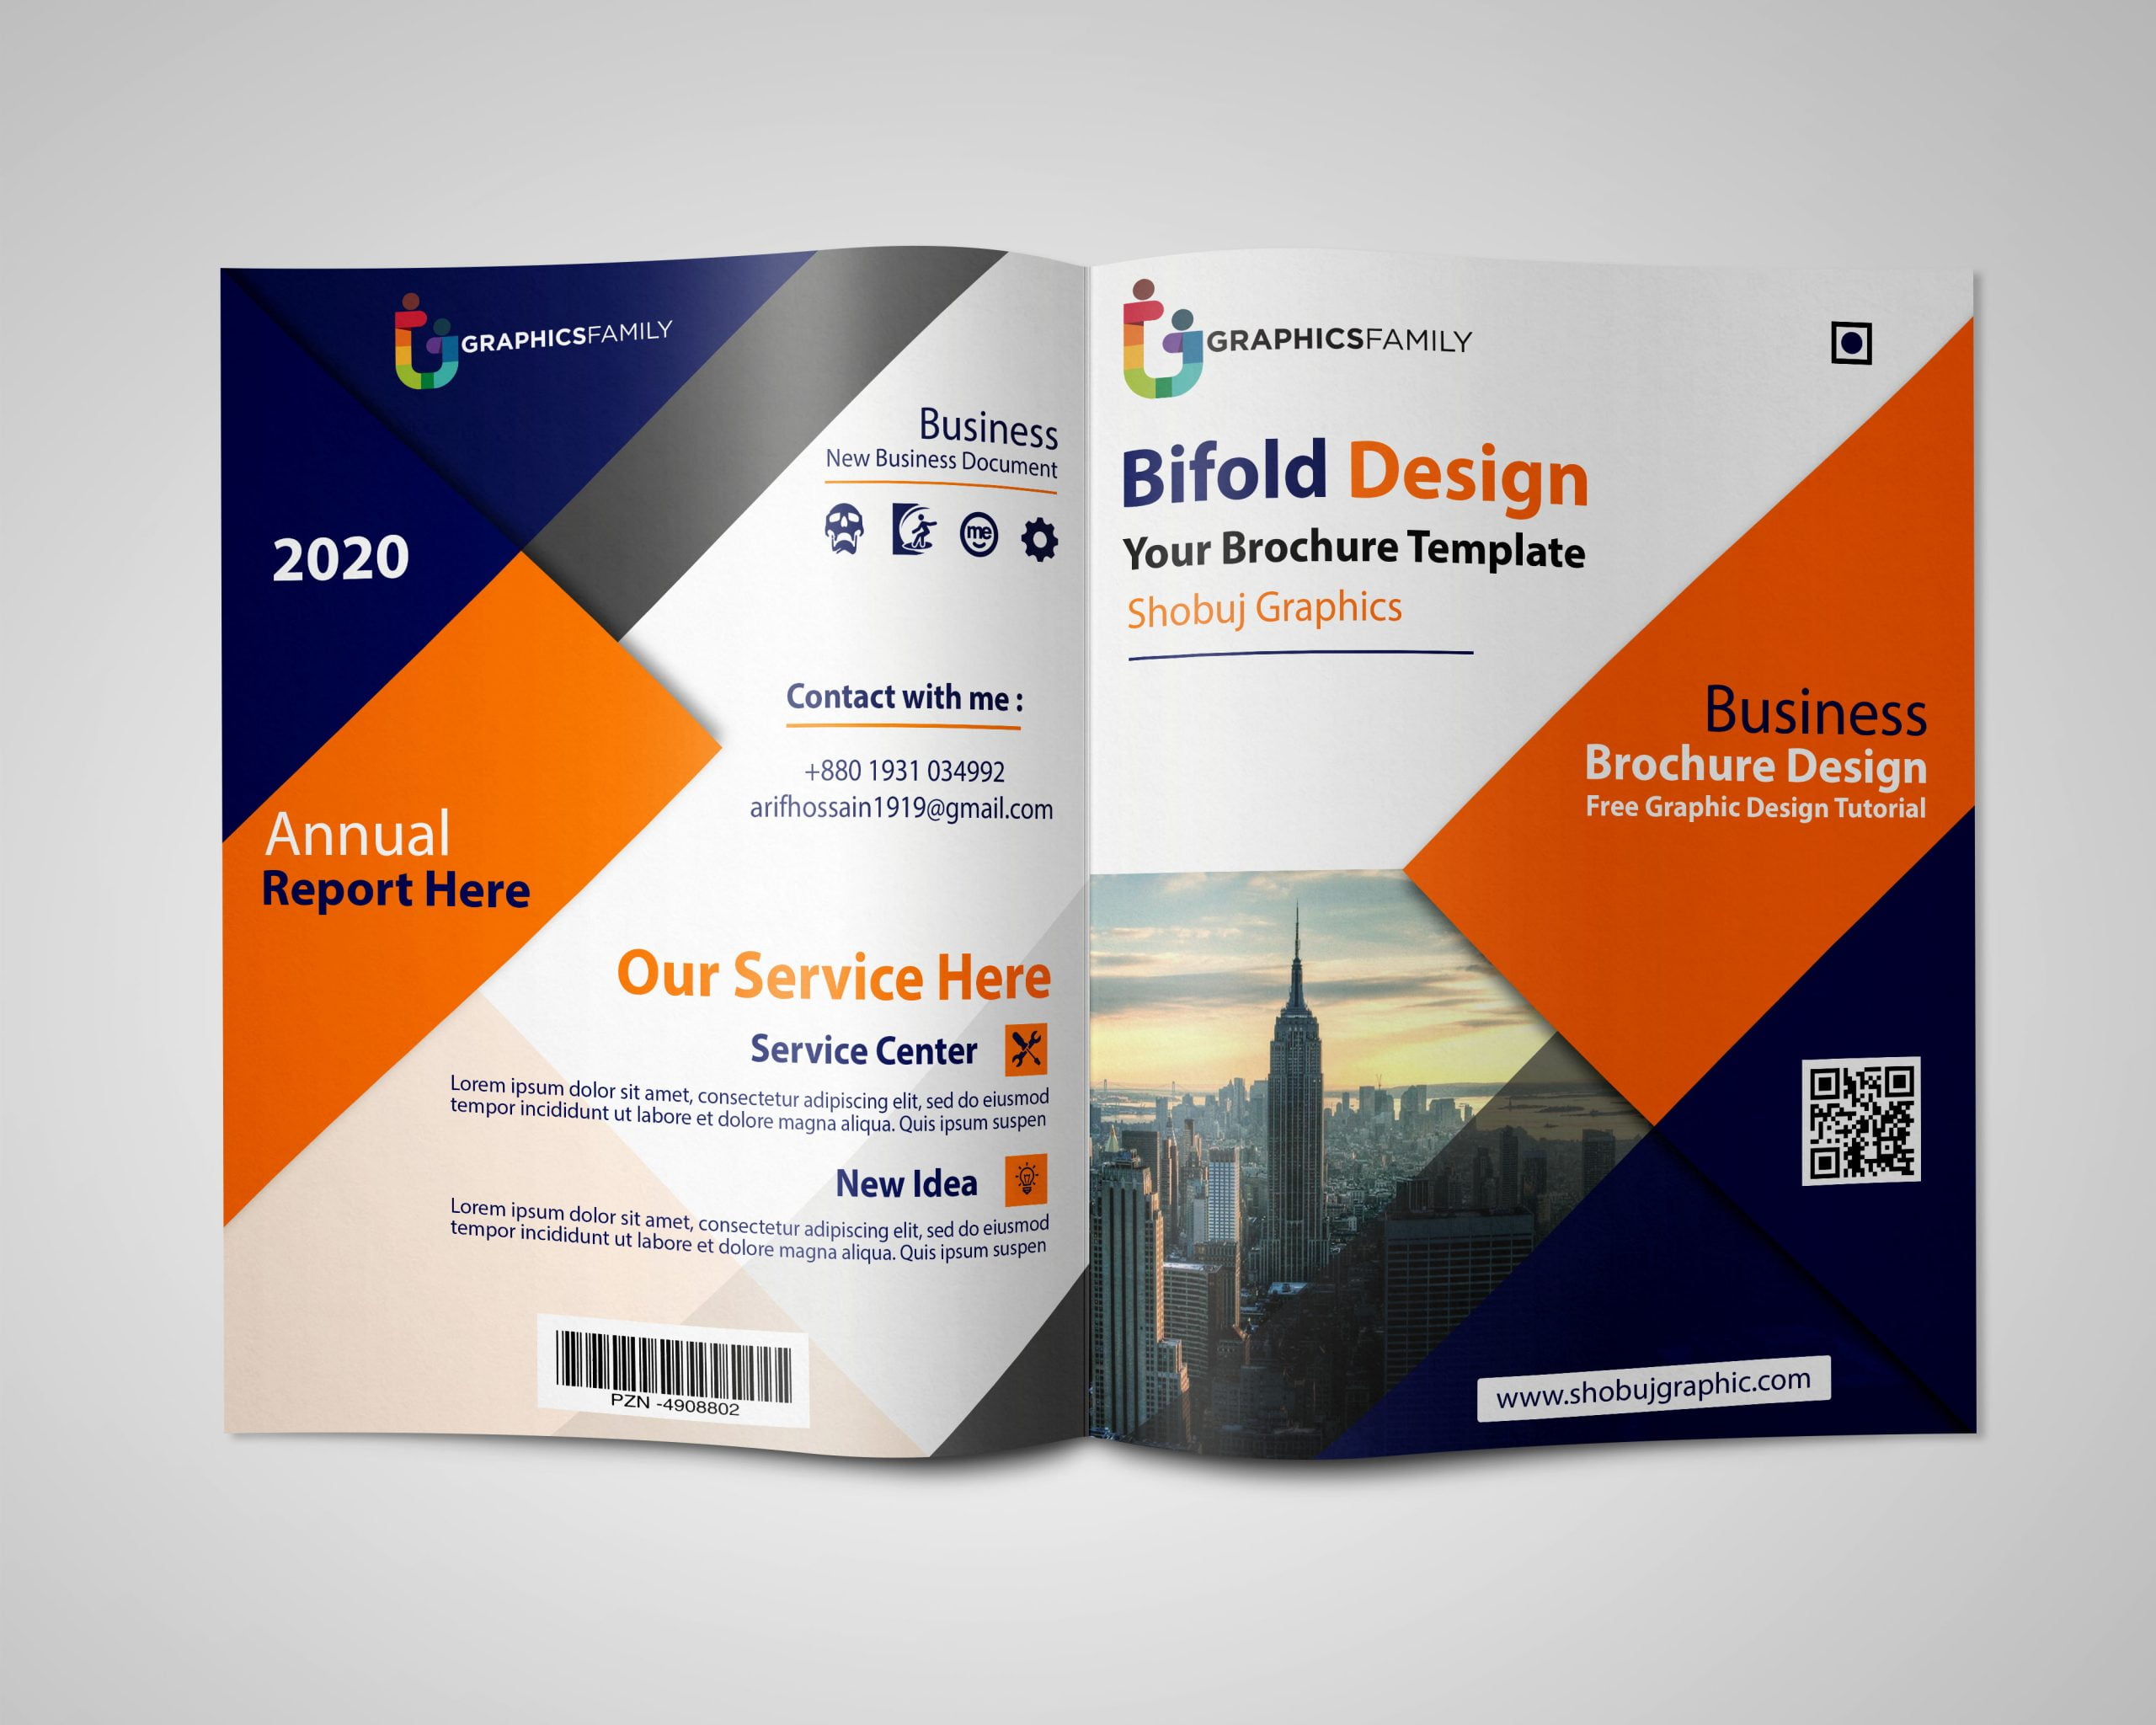 Free Product Brochure Template from graphicsfamily.com